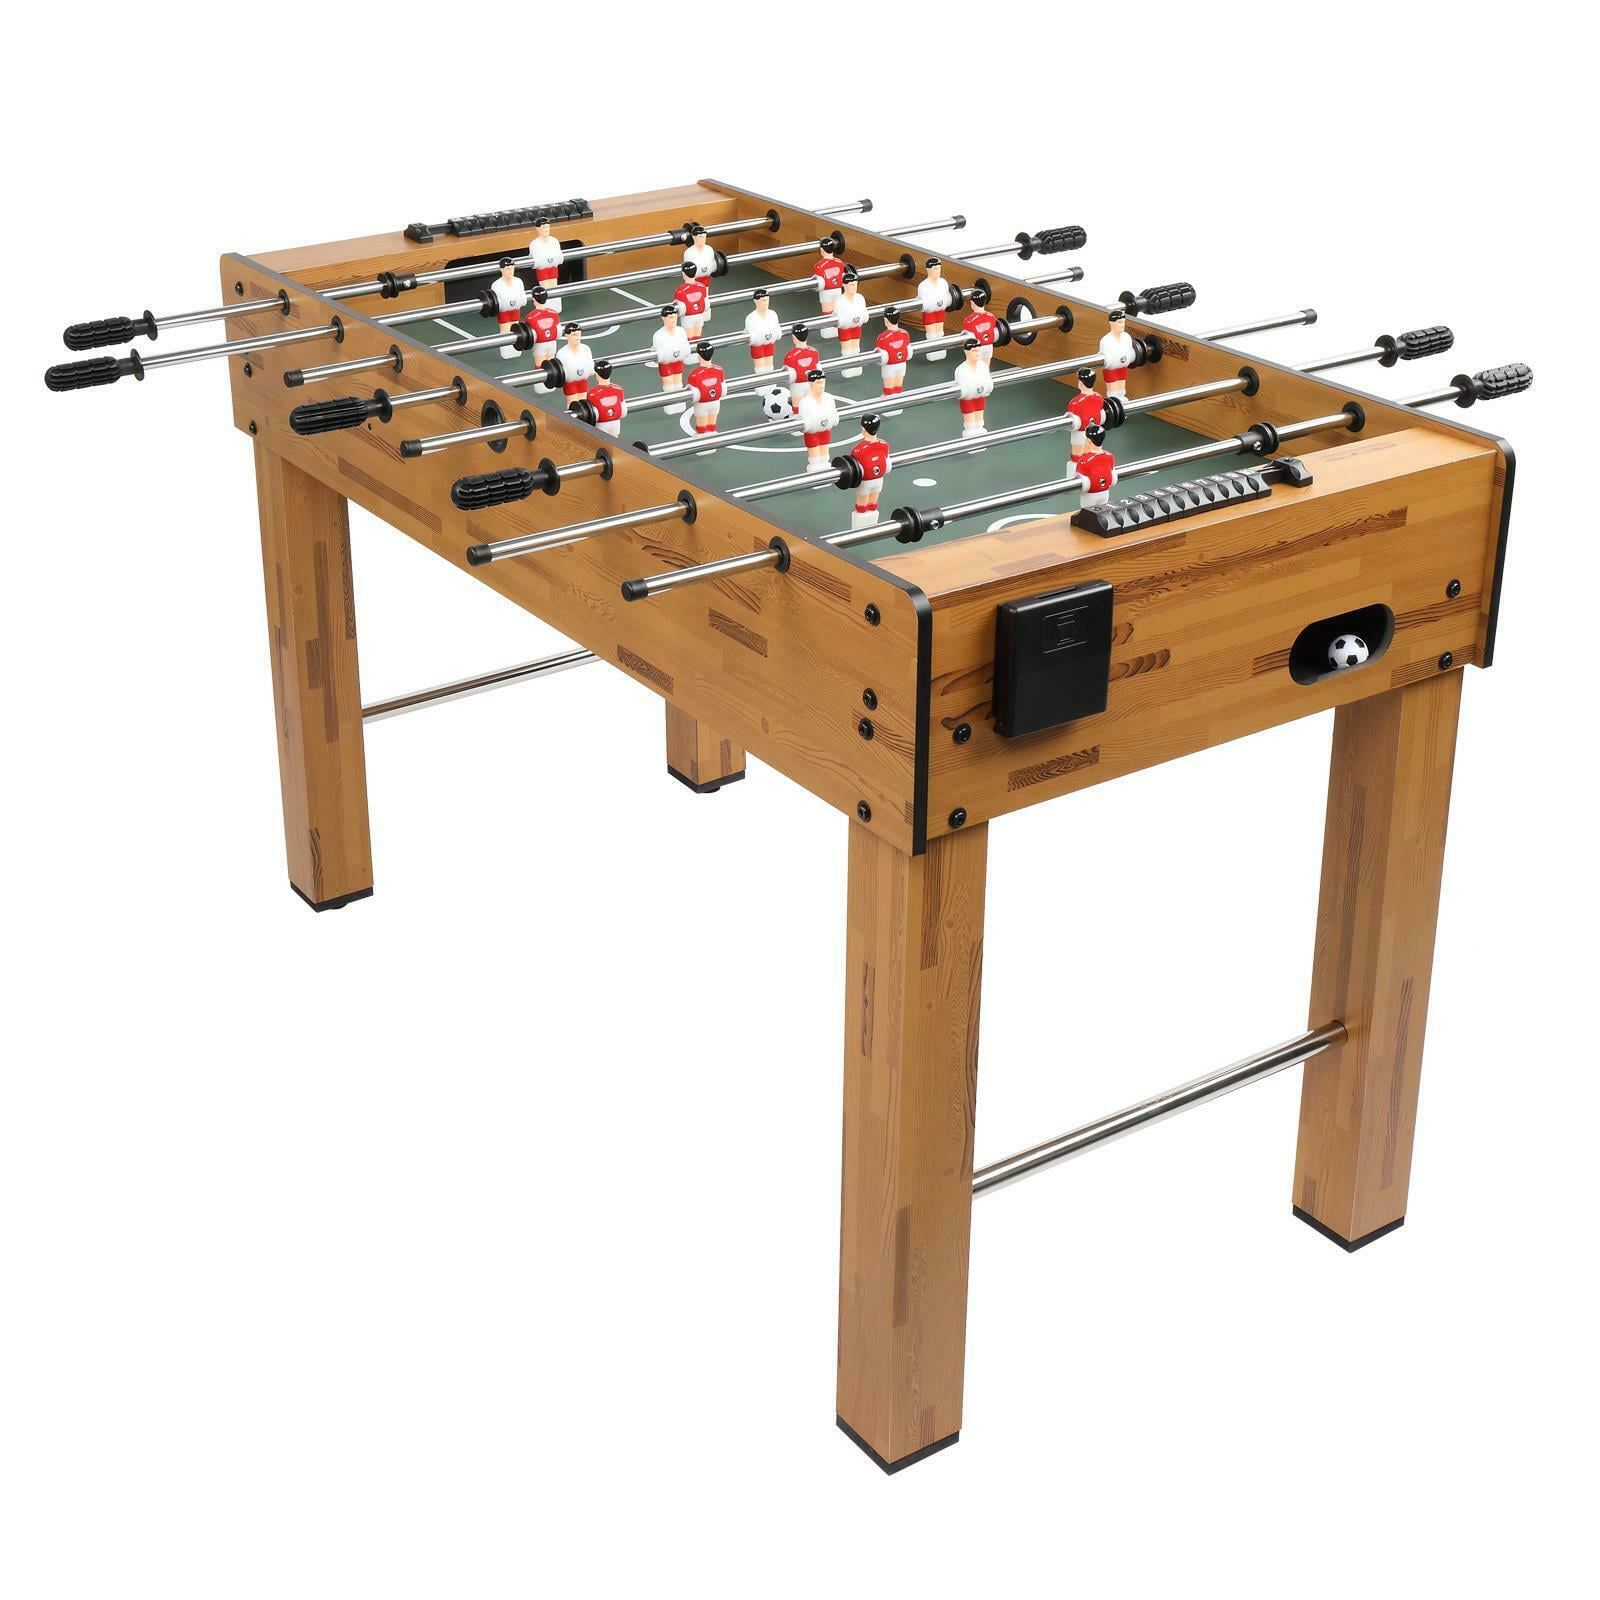 48-inch Game Foosball Table W/2 Balls 2 Cup Holders Indoor Soccer Table As a 